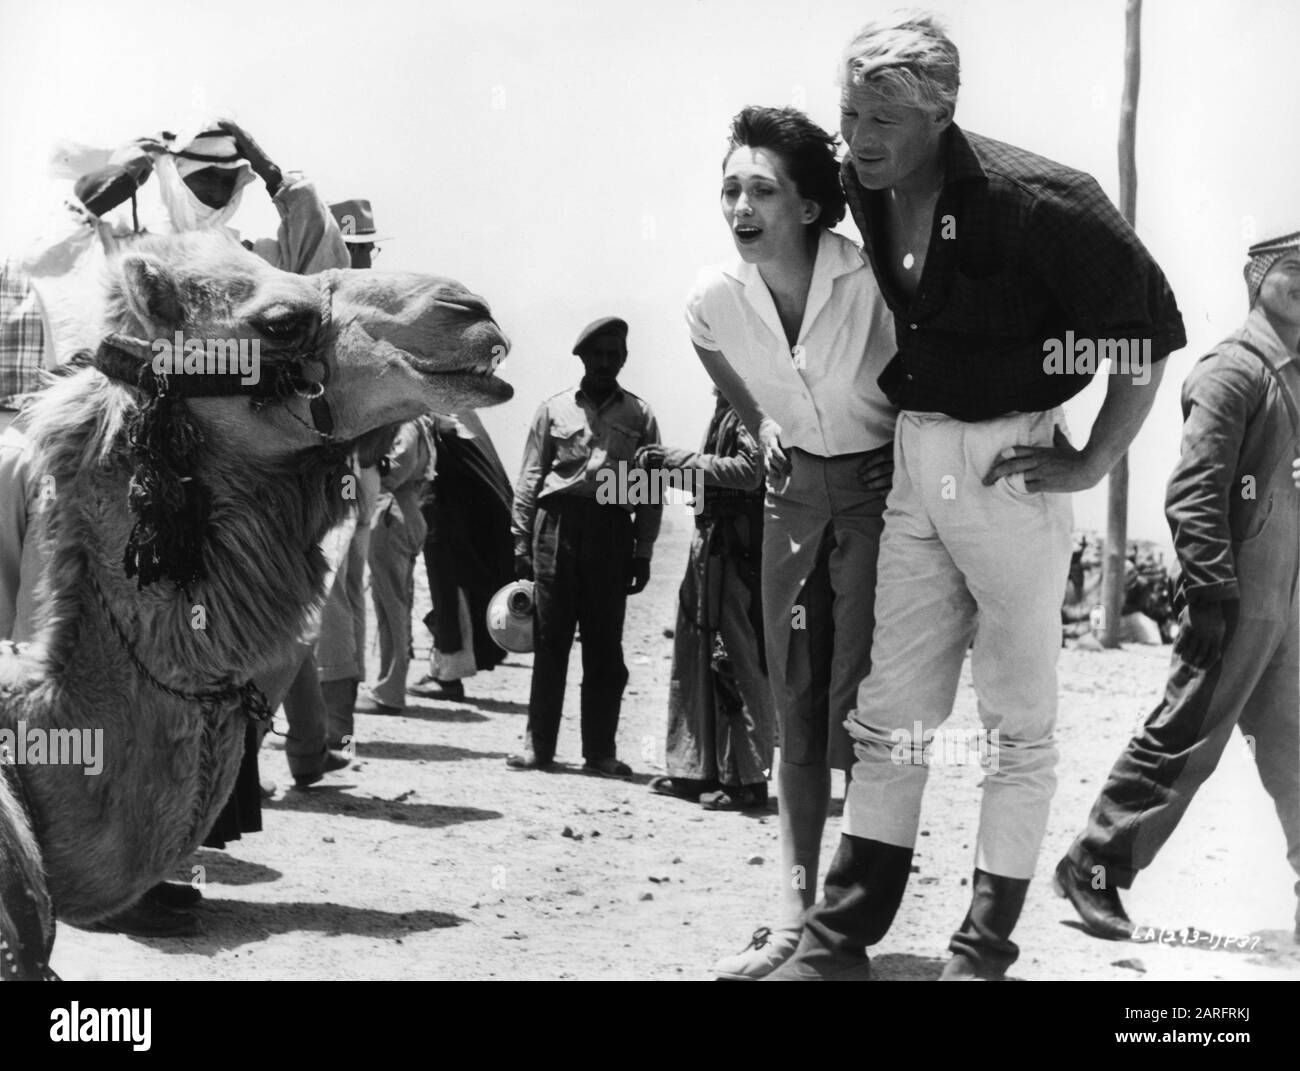 PETER O'TOOLE and his wife SIAN PHILLIPS on set location candid during filming of LAWRENCE OF ARABIA 1962 director DAVID LEAN screenplay ROBERT BOLT and  MICHAEL WILSON producer SAM SPIEGEL Horizon Pictures / Columbia Pictures Corporation Stock Photo